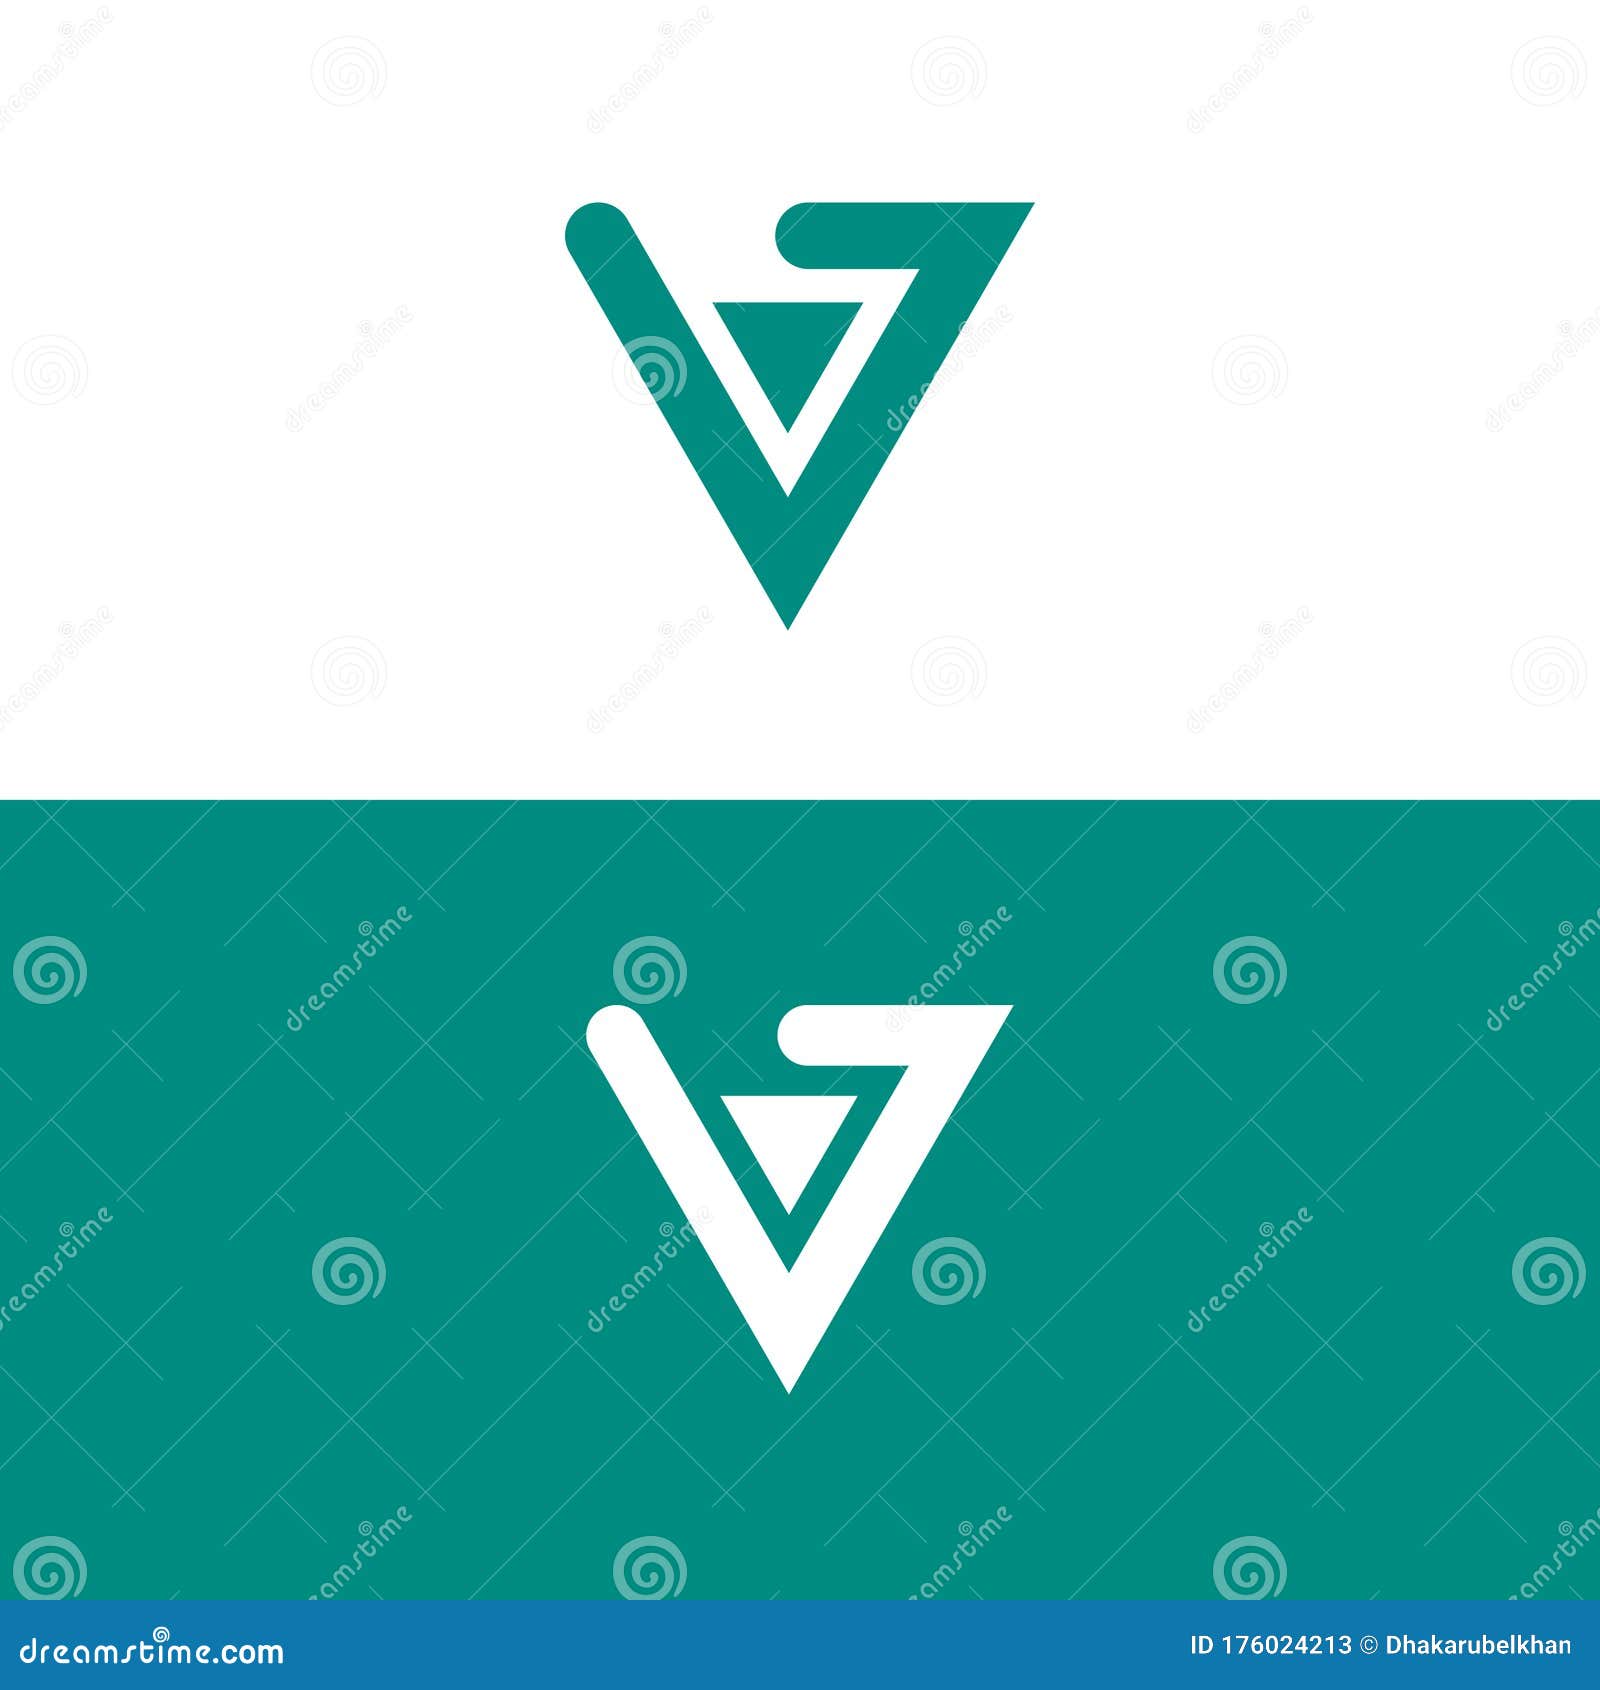 Design A Very Professional Letter V Logo Design For Your Business Stock Vector Illustration Of Fast Isolated